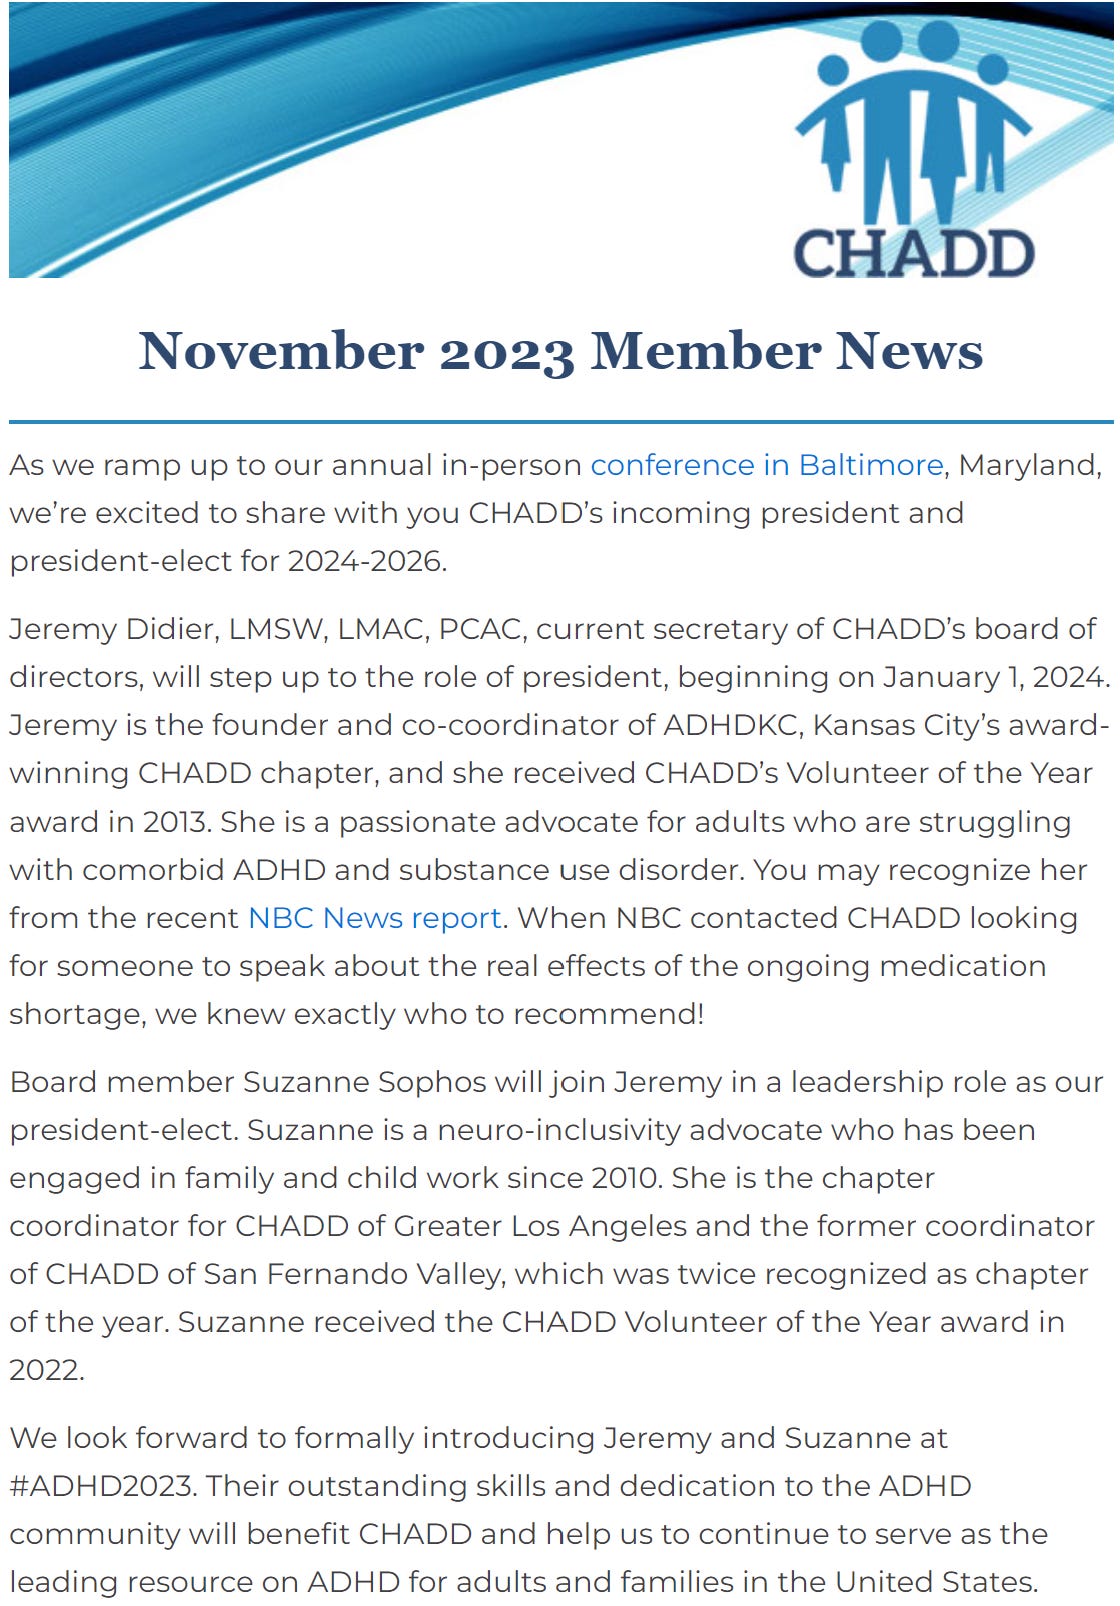 Screen shot of CHADD November 2023 Member News    As we ramp up to our annual in-person conference in Baltimore, Maryland, we’re excited to share with you CHADD’s incoming president and president-elect for 2024-2026.  Jeremy Didier, LMSW, LMAC, PCAC, current secretary of CHADD’s board of directors, will step up to the role of president, beginning on January 1, 2024. Jeremy is the founder and co-coordinator of ADHDKC, Kansas City’s award-winning CHADD chapter, and she received CHADD’s Volunteer of the Year award in 2013. She is a passionate advocate for adults who are struggling with comorbid ADHD and substance use disorder. You may recognize her from the recent NBC News report. When NBC contacted CHADD looking for someone to speak about the real effects of the ongoing medication shortage, we knew exactly who to recommend!  Board member Suzanne Sophos will join Jeremy in a leadership role as our president-elect. Suzanne is a neuro-inclusivity advocate who has been engaged in family and child work since 2010. She is the chapter coordinator for CHADD of Greater Los Angeles and the former coordinator of CHADD of San Fernando Valley, which was twice recognized as chapter of the year. Suzanne received the CHADD Volunteer of the Year award in 2022.  We look forward to formally introducing Jeremy and Suzanne at #ADHD2023. Their outstanding skills and dedication to the ADHD community will benefit CHADD and help us to continue to serve as the leading resource on ADHD for adults and families in the United States.